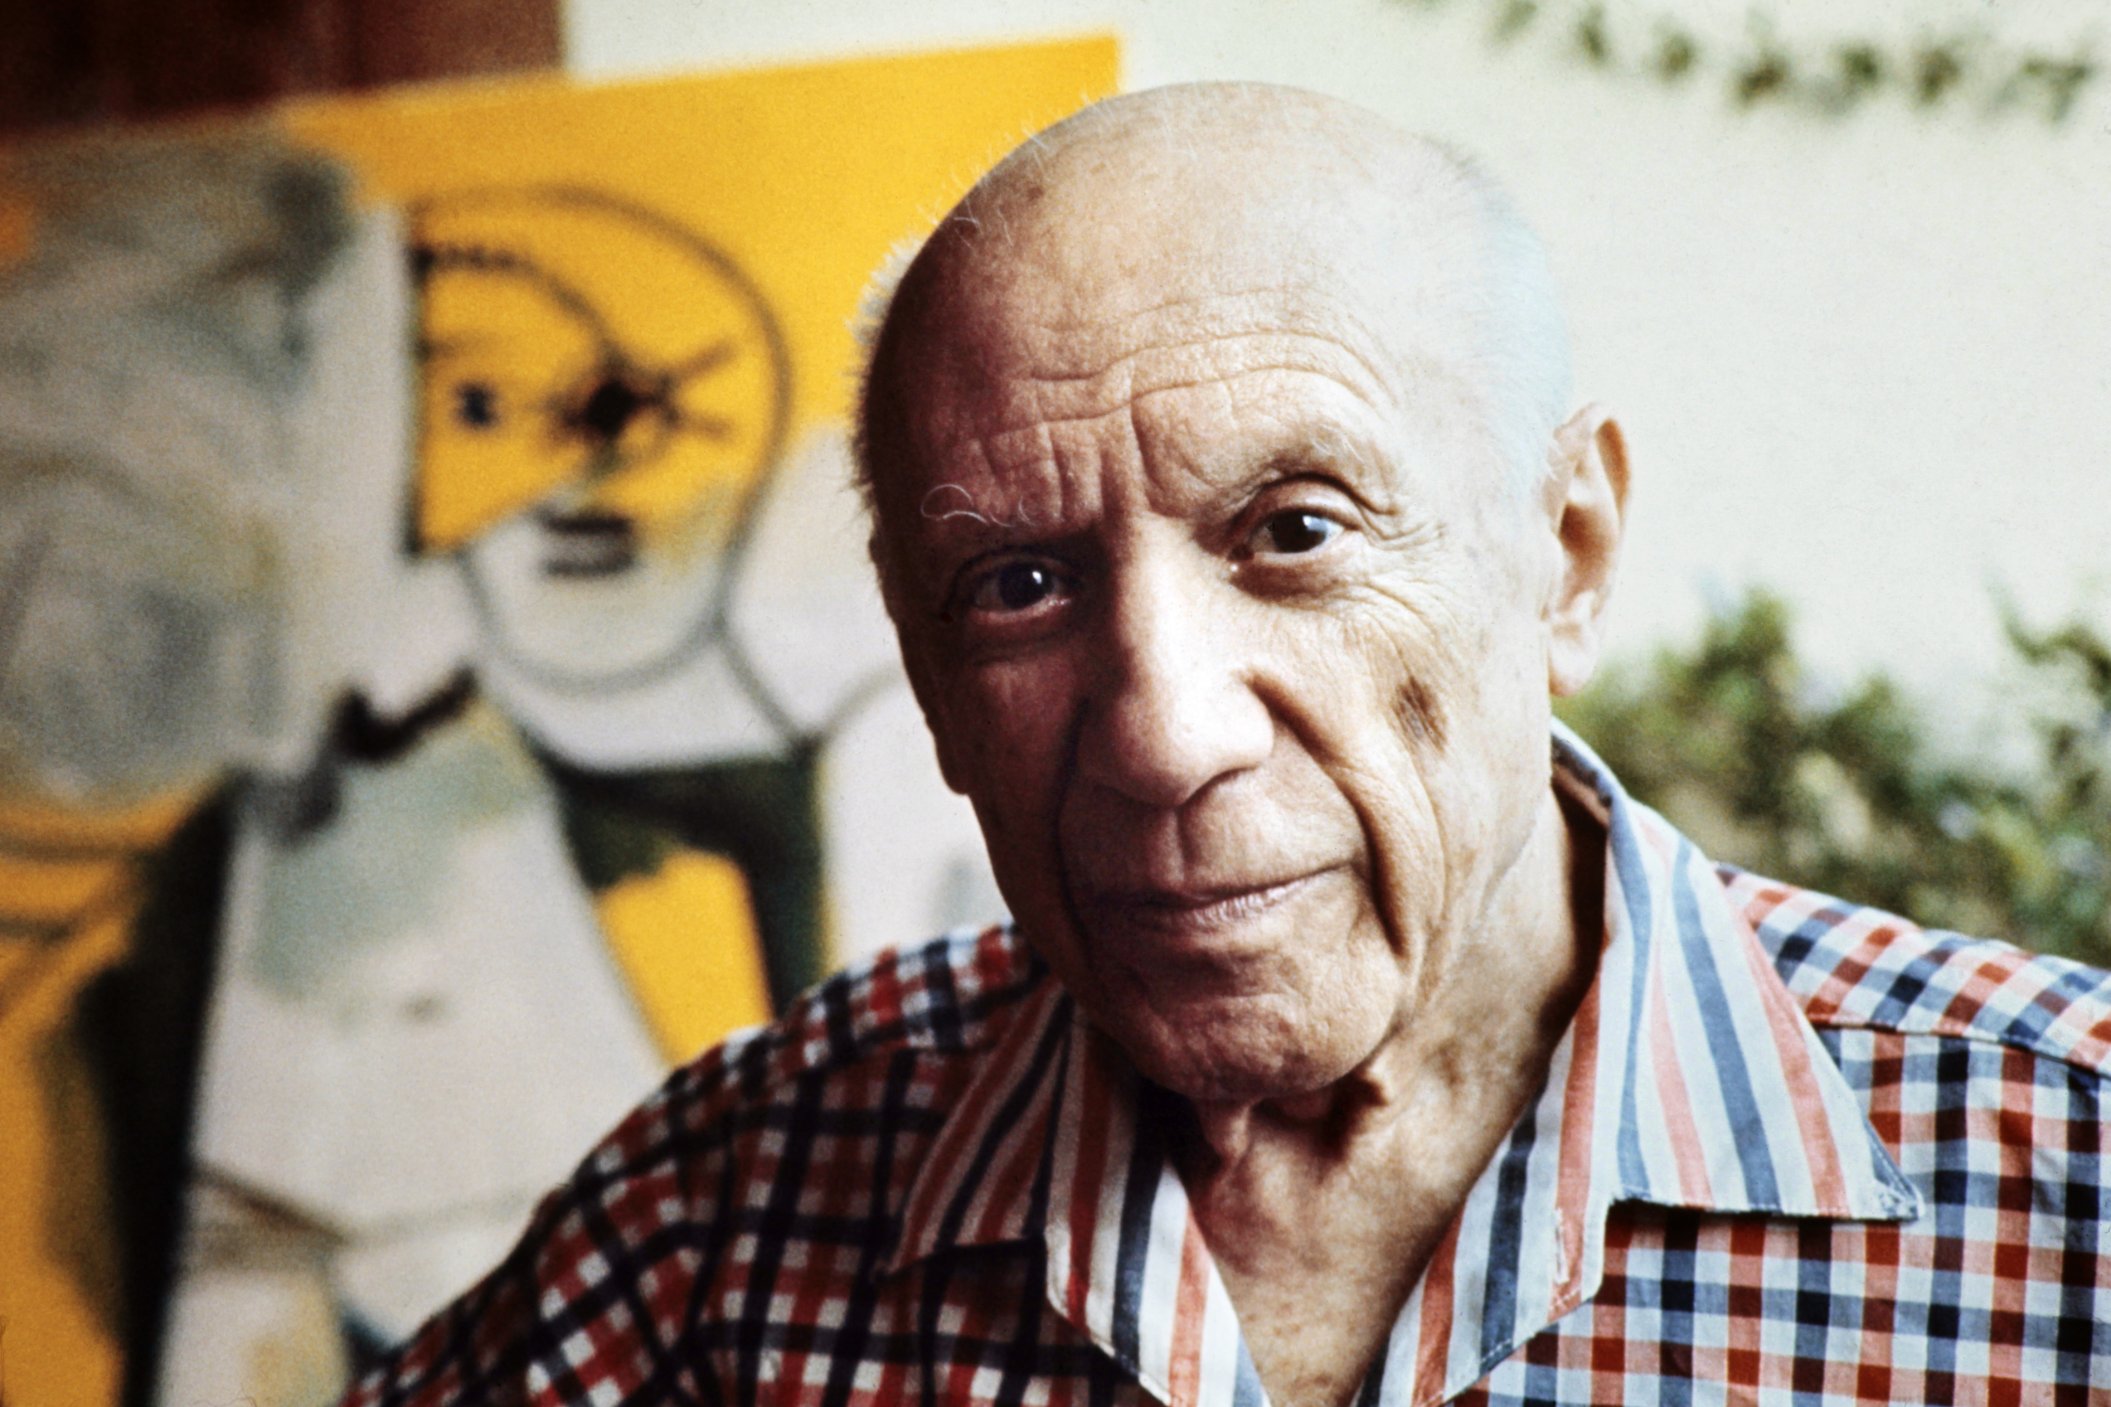 Famous Picasso paintings: 7 essential works by the Spanish master - CNN Style